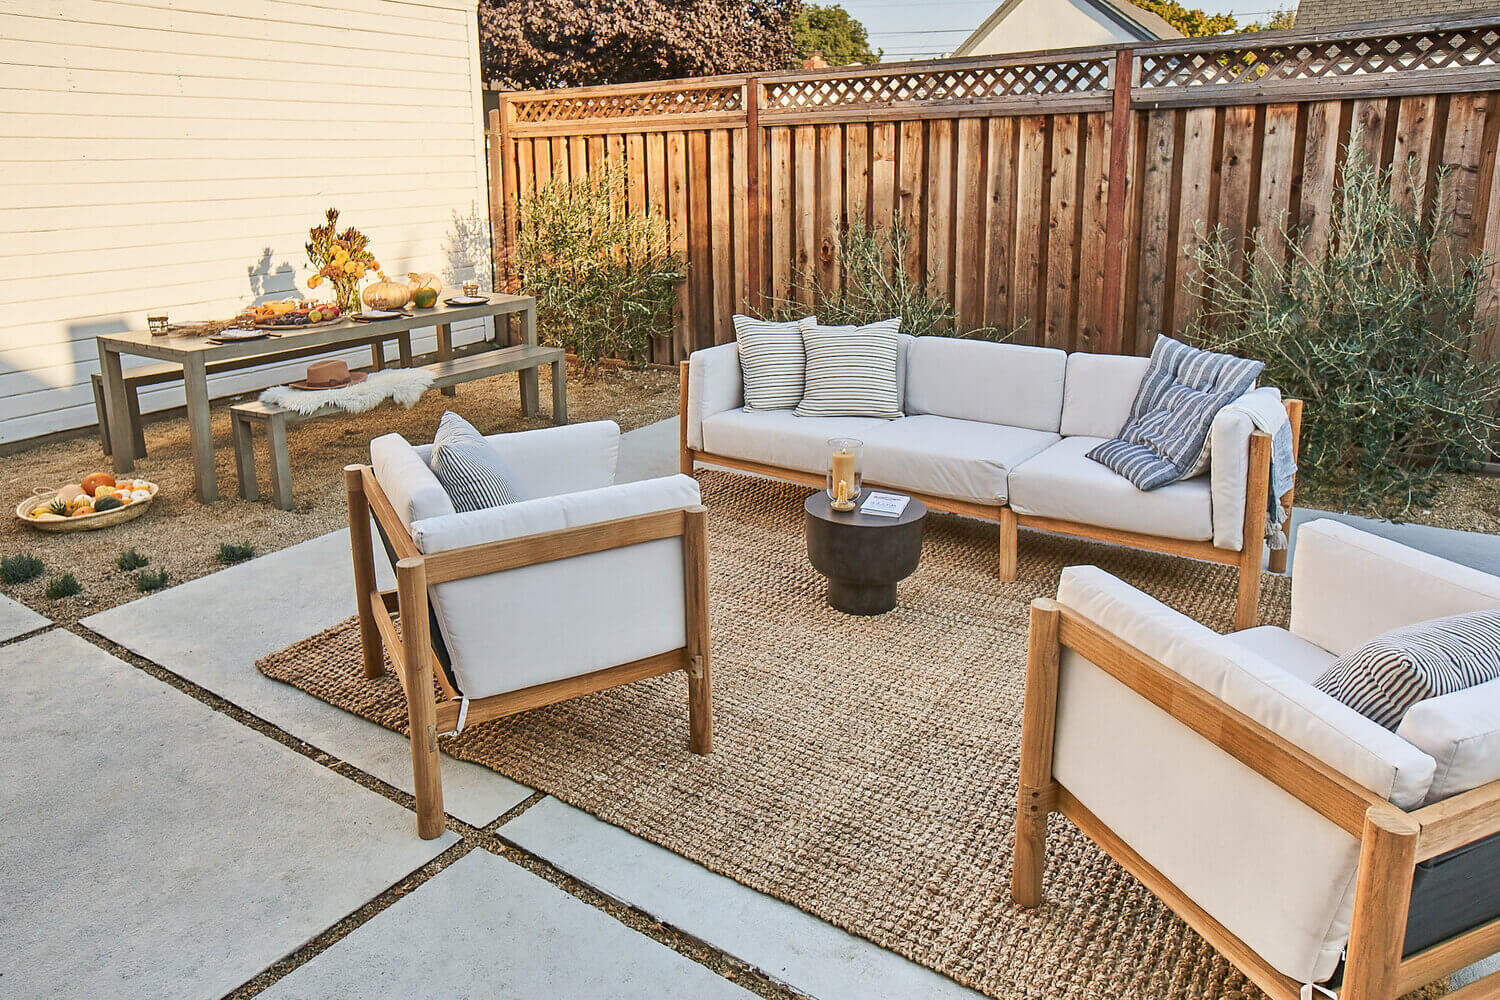 Two Neighbor chairs and sofa on a patio in San Leandro backyard.